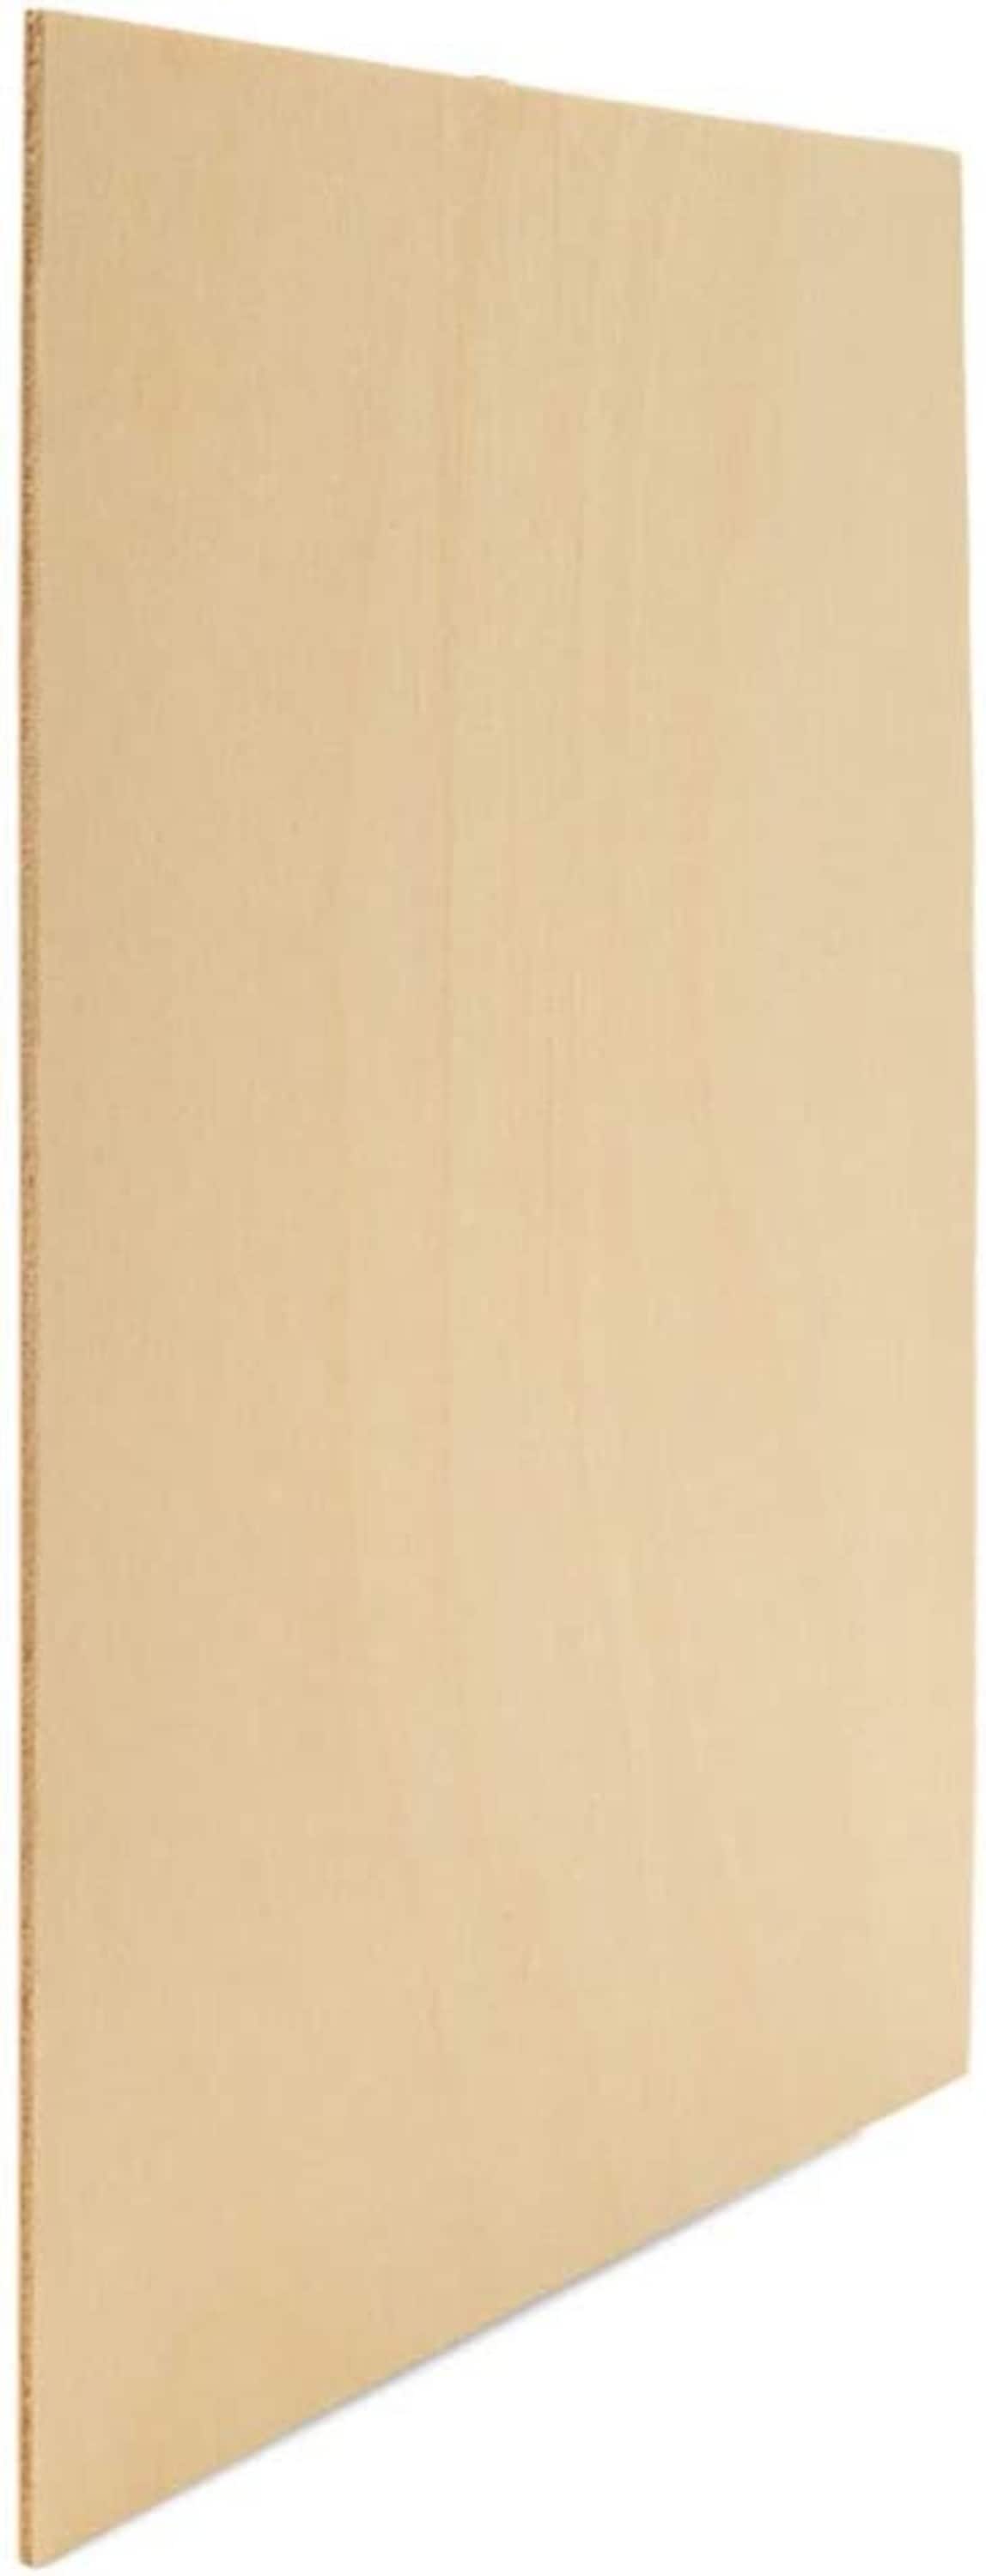 Small Birch Painting Panel 5 x 7 x 3/4-inch, Pack of 32 Wood Canvas Boards  for Painting, Blank Signs for Crafts, by Woodpeckers 